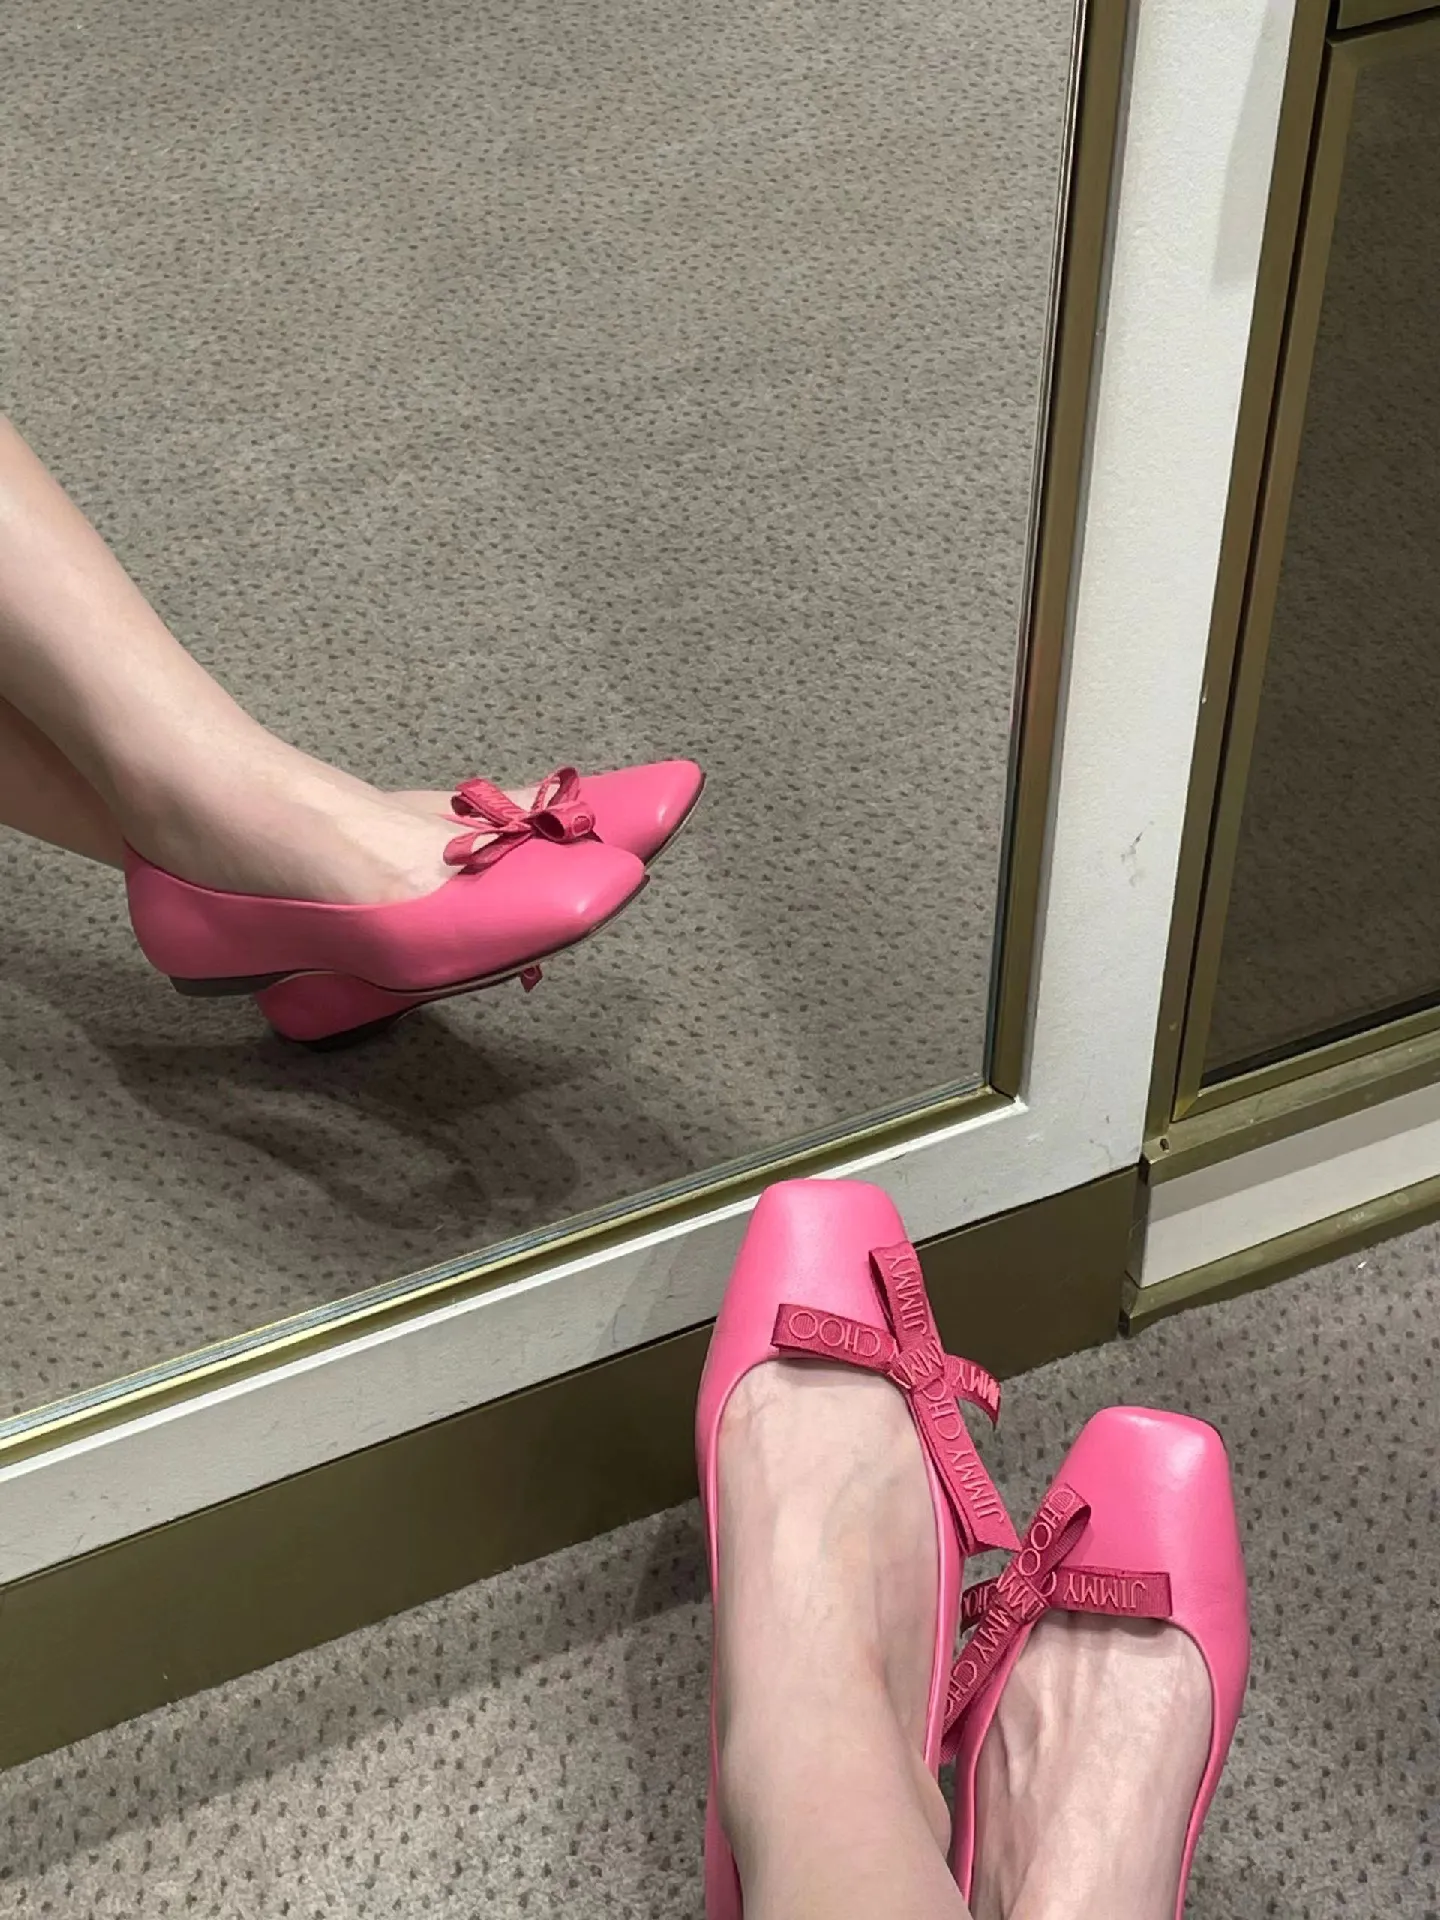 Jimmy Choo/VEDA BALLERINA flats pink | Gallery posted by Sa-Jc